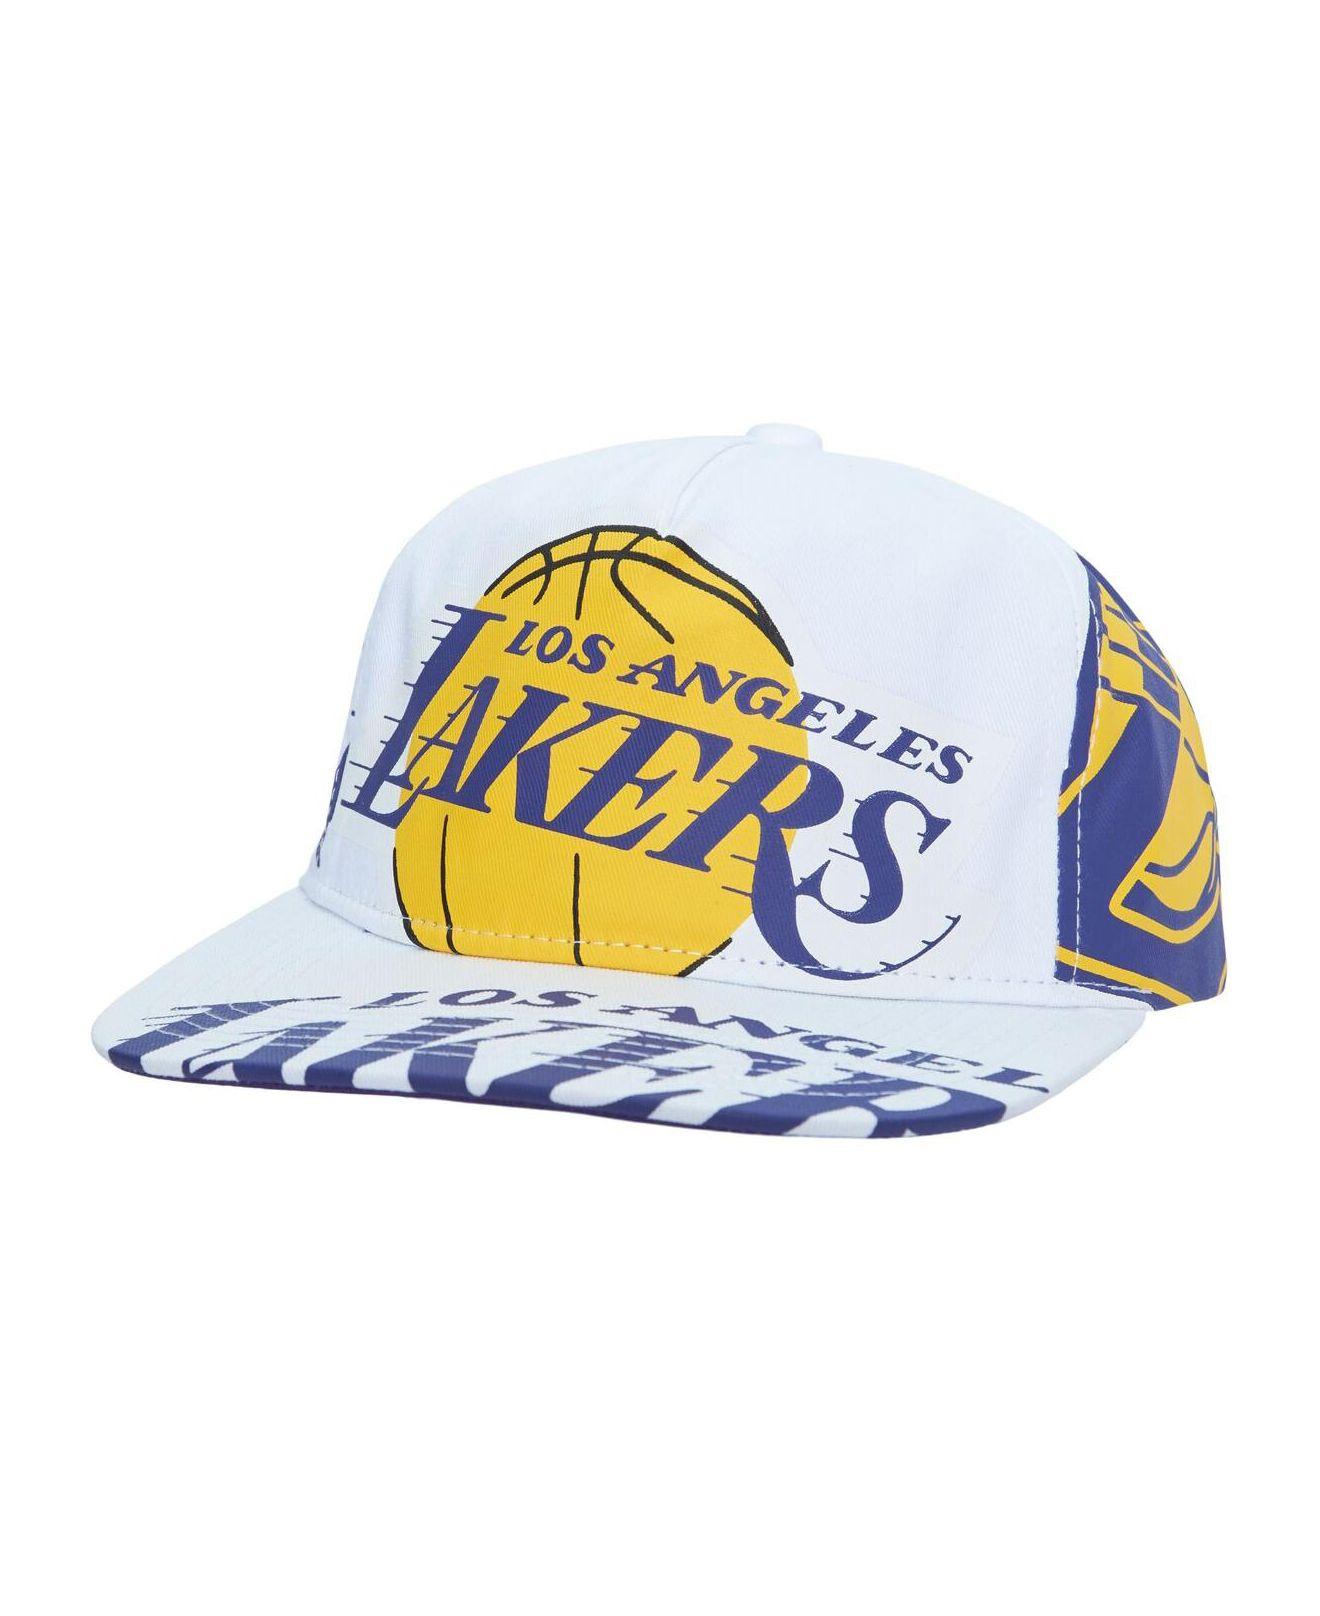 Mitchell & Ness Shaquille O'Neal White Los Angeles Lakers Hardwood Classics 90's Playa Deadstock SNA